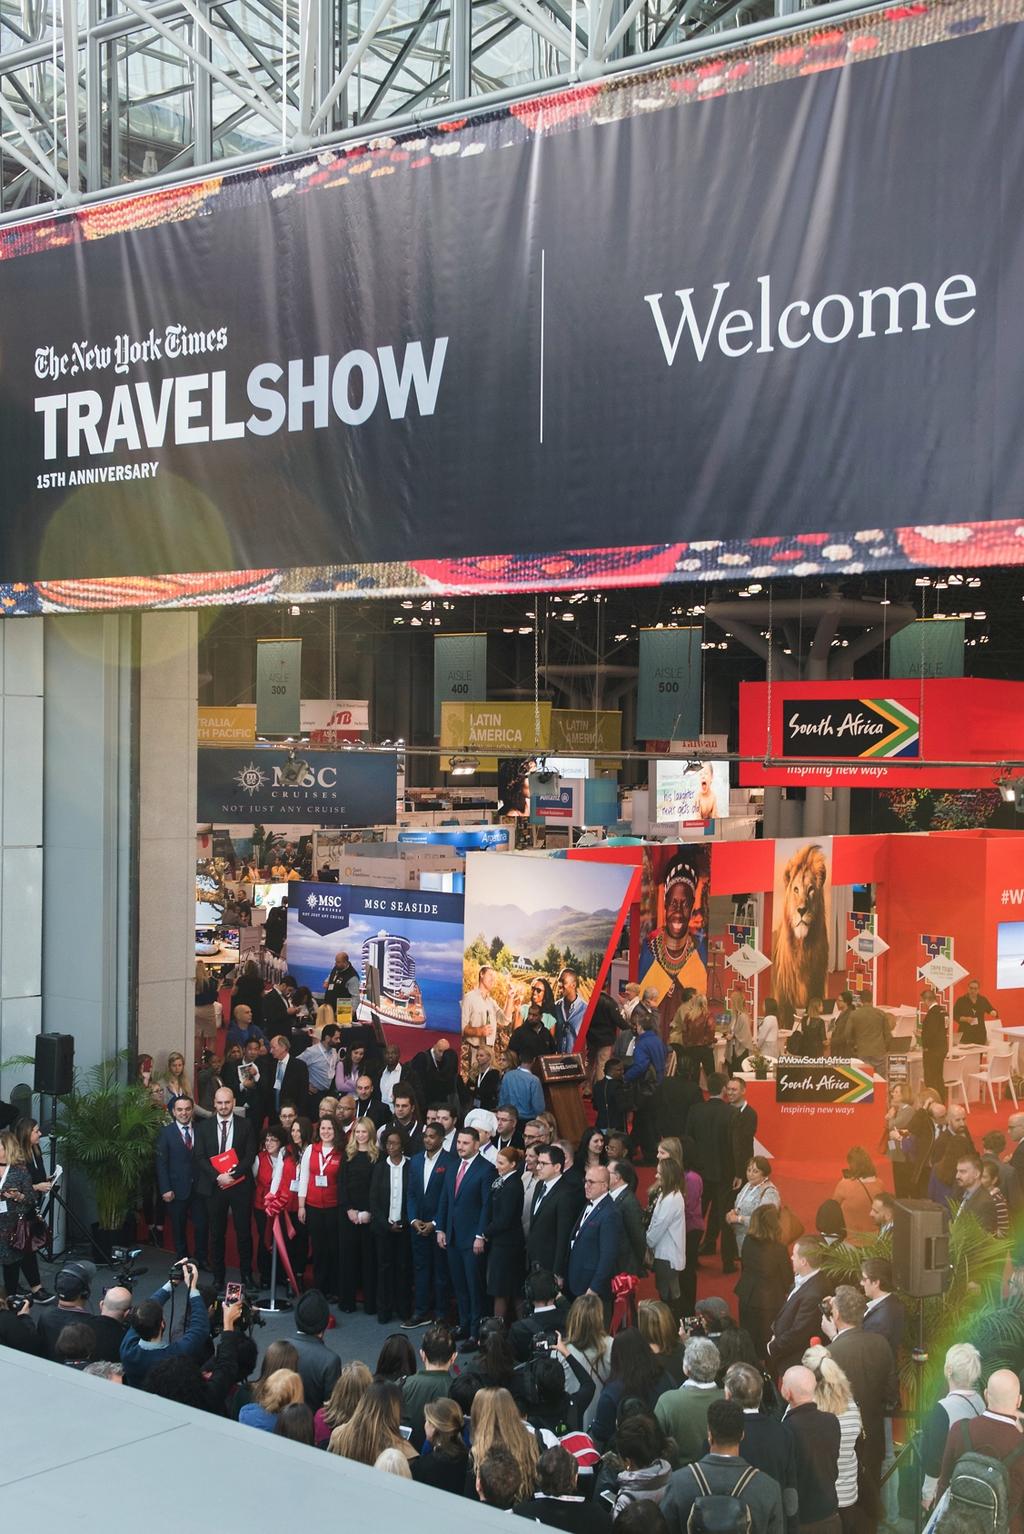 2019 TRAVEL SHOW // FACTS & NUMBERS 5 A Record 2018 Attendance TOTAL 2018 ATTENDANCE Total Attendance: 32,398 Trade Attendance: 10,268 Consumer Attendance: 22,130 Media/Press Attendance: 1,384 610